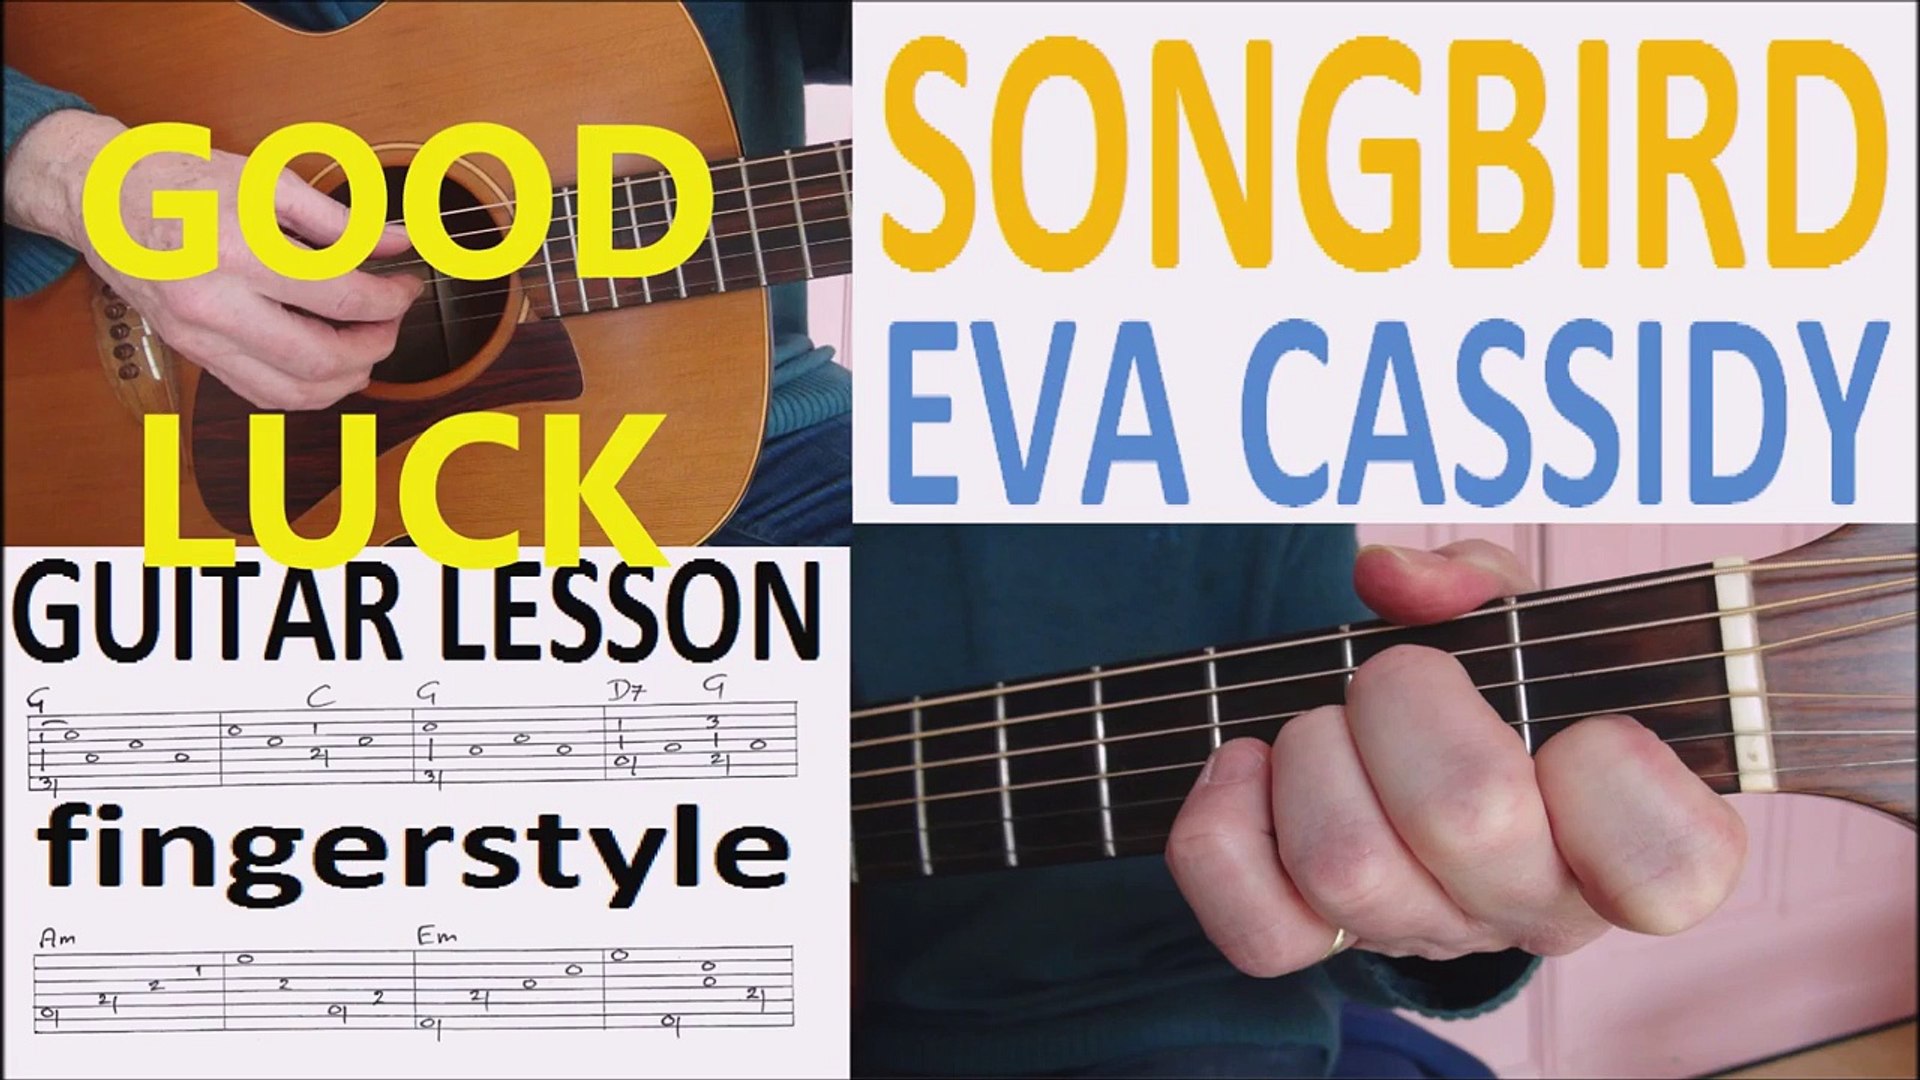 SONGBIRD EVA CASSIDY fingerstyle GUITAR LESSON - video Dailymotion